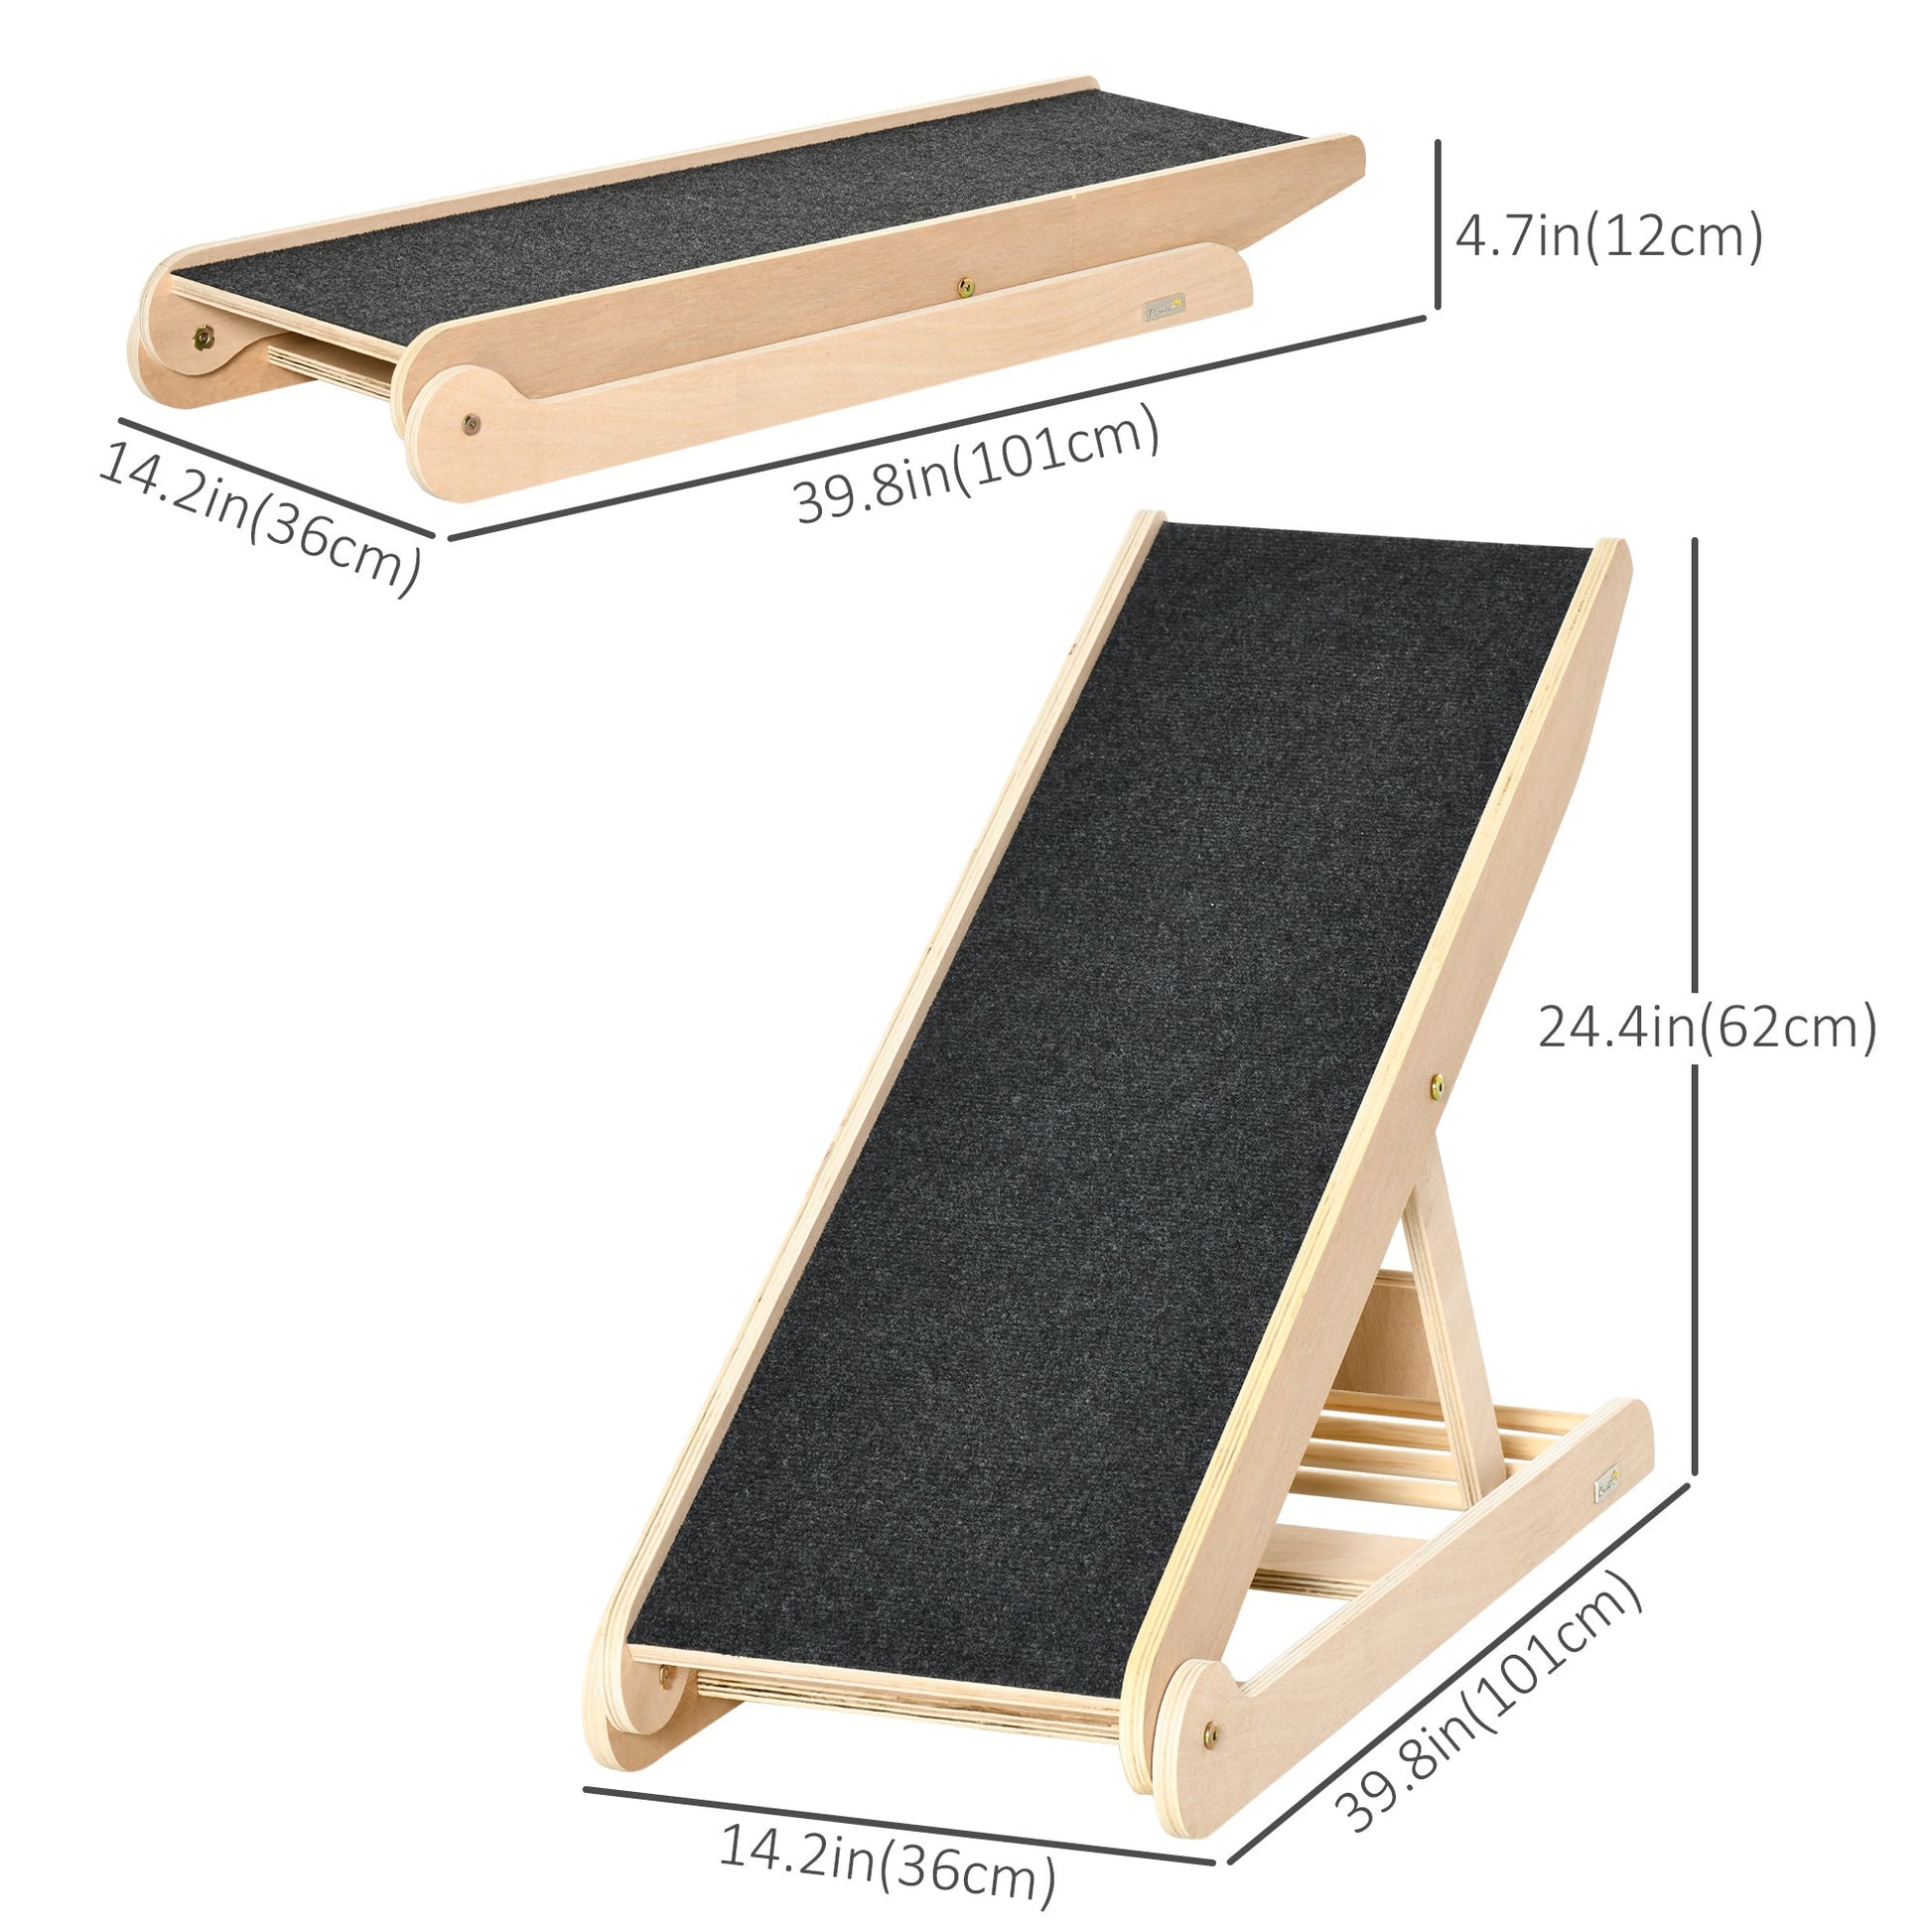 Dog Ramp for Bed Couch, Foldable Pet Ramp Height Adjustable 4 Levels from 14.75" to 24.5" for Cats and Small Dogs with Non-Slip Carpeted Surface, Natural - Gallery Canada